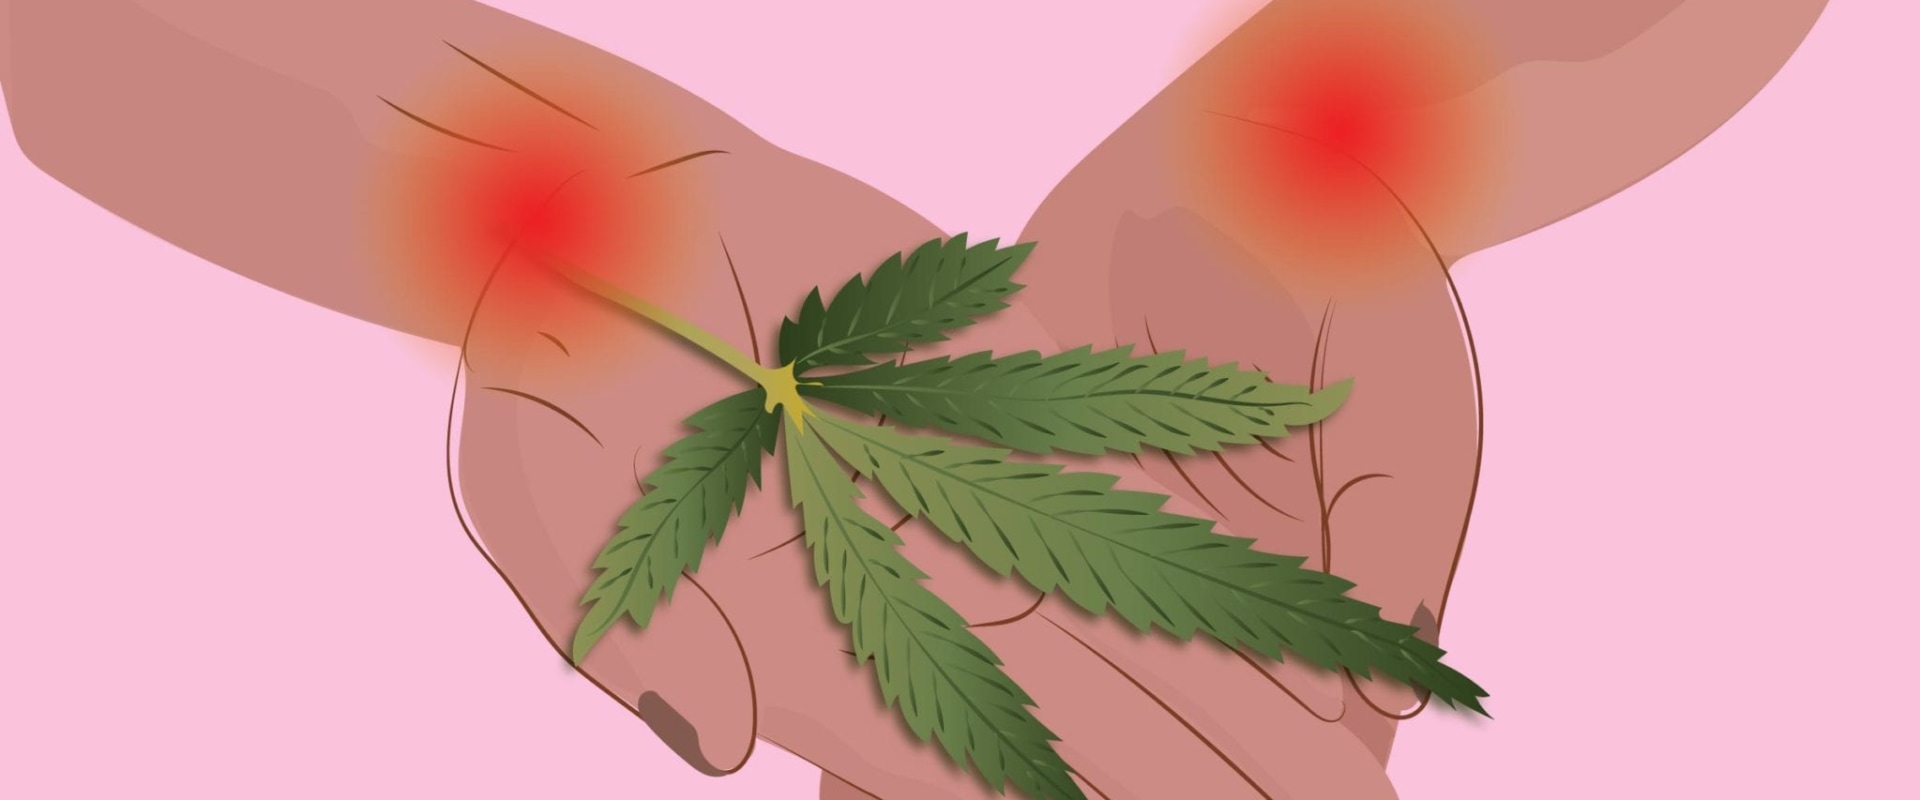 Cannabis for Pain Management: The Latest Research and Medicinal Benefits